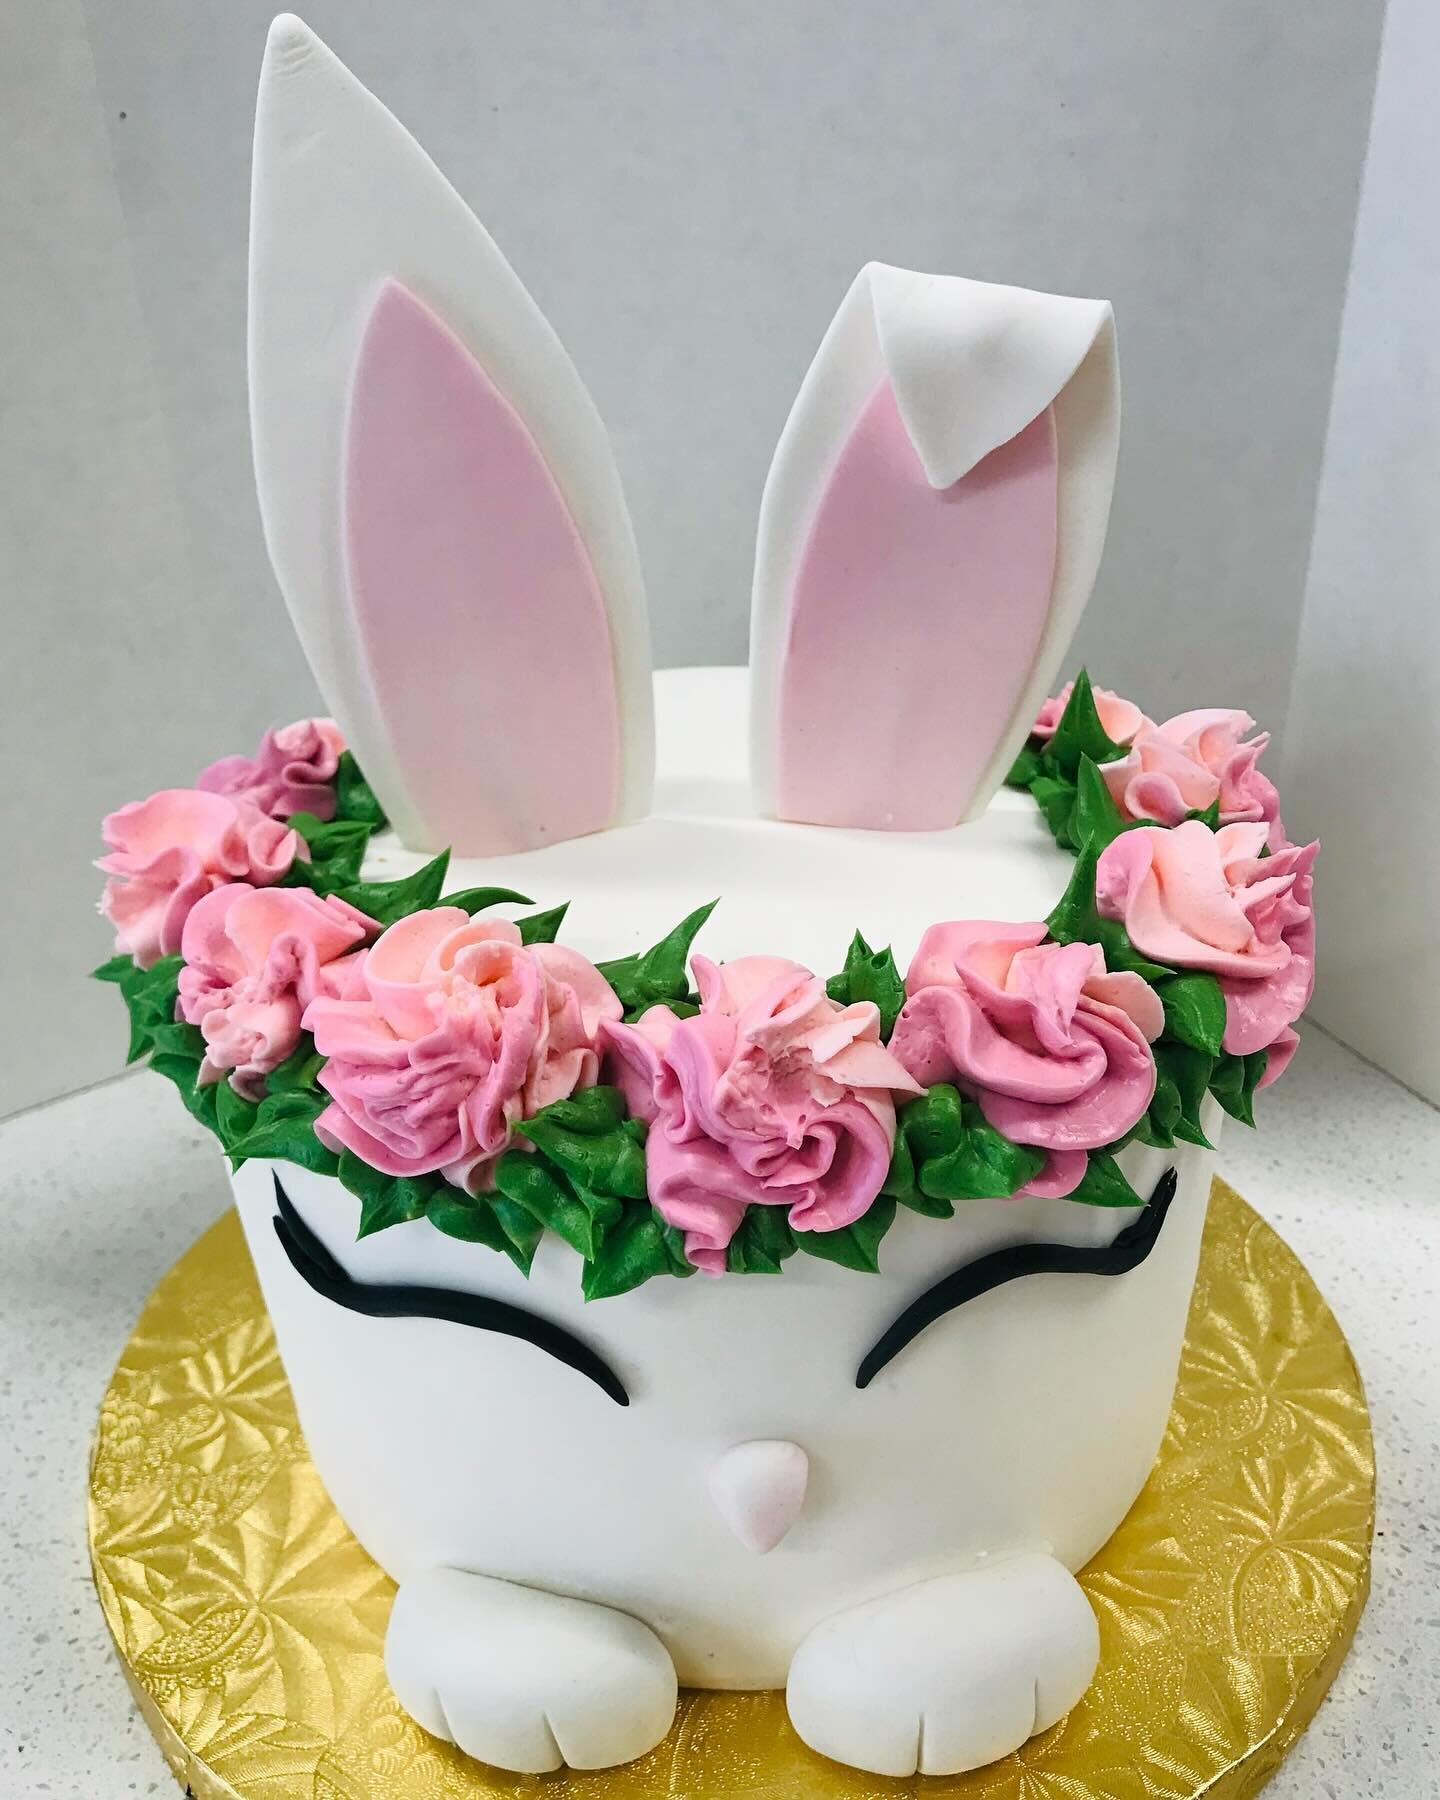 Happy March! Our Easter menu will be hopping onto our website next week &hellip; keep your eyes peeled!  #5280eats  #303eats  #boulderco  #boulderfoodie #eatlocal  #shamanesbakery #supportlocal #eastercake